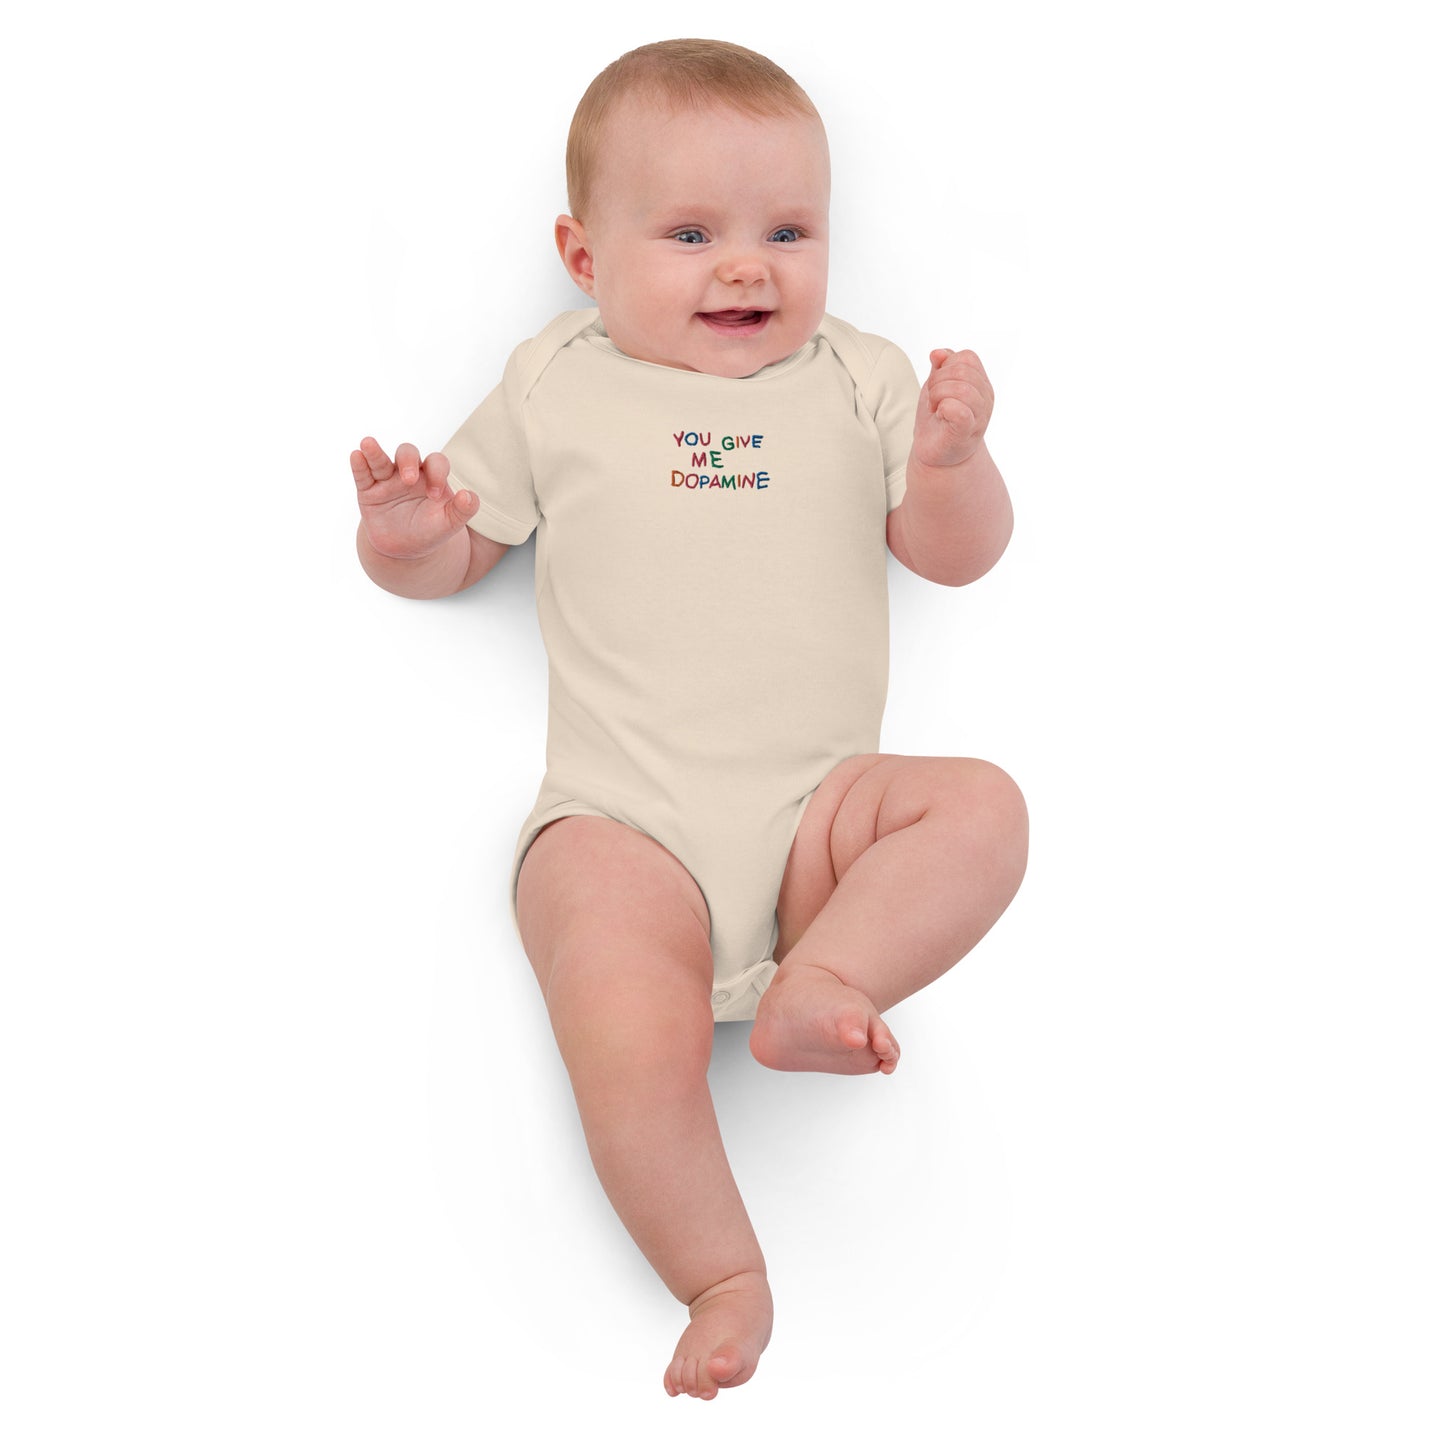 Give me Dopamine  Embroidered Slogan Organic cotton baby bodysuit